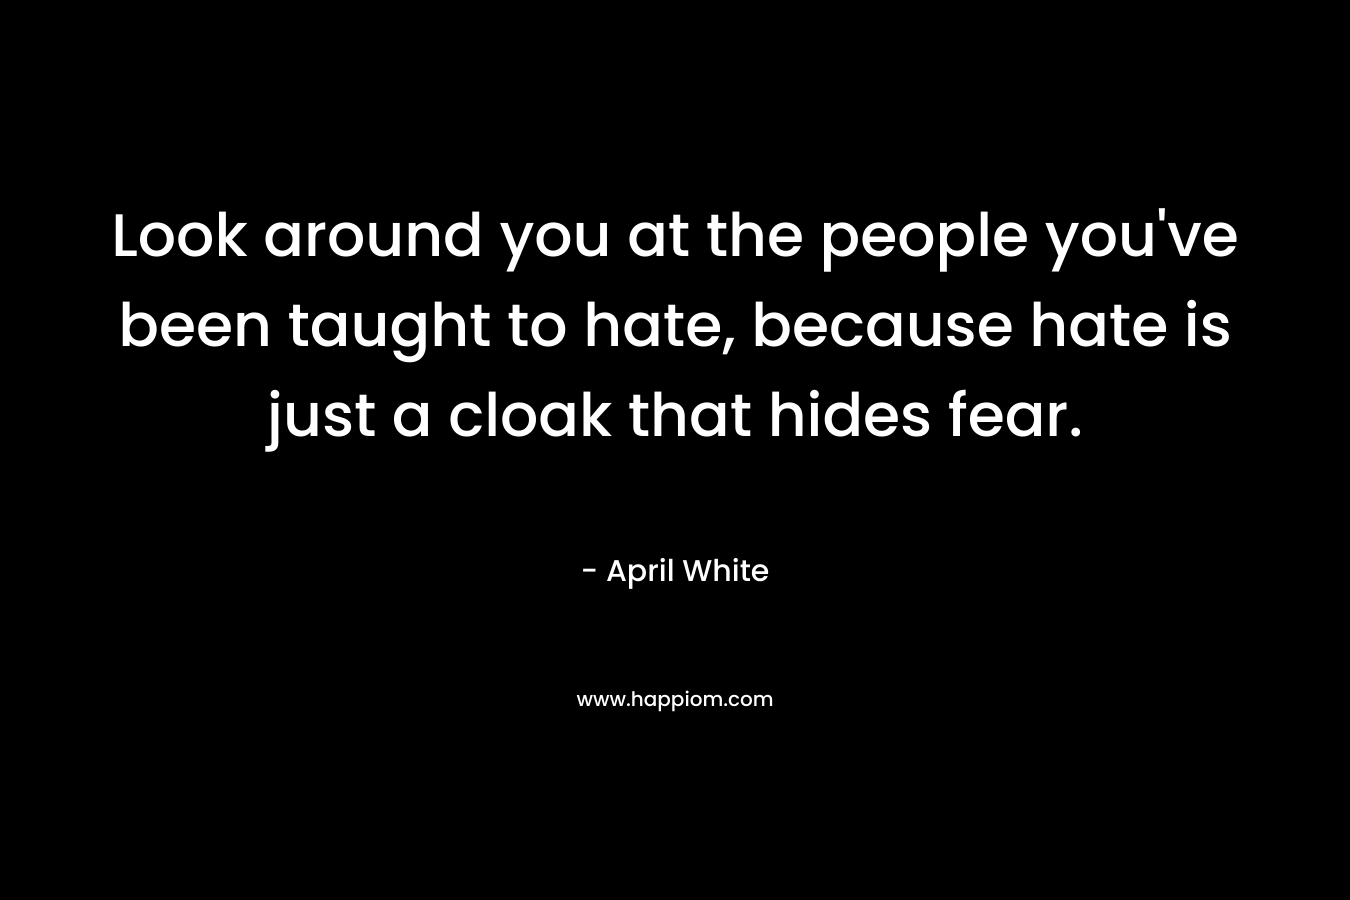 Look around you at the people you’ve been taught to hate, because hate is just a cloak that hides fear. – April White